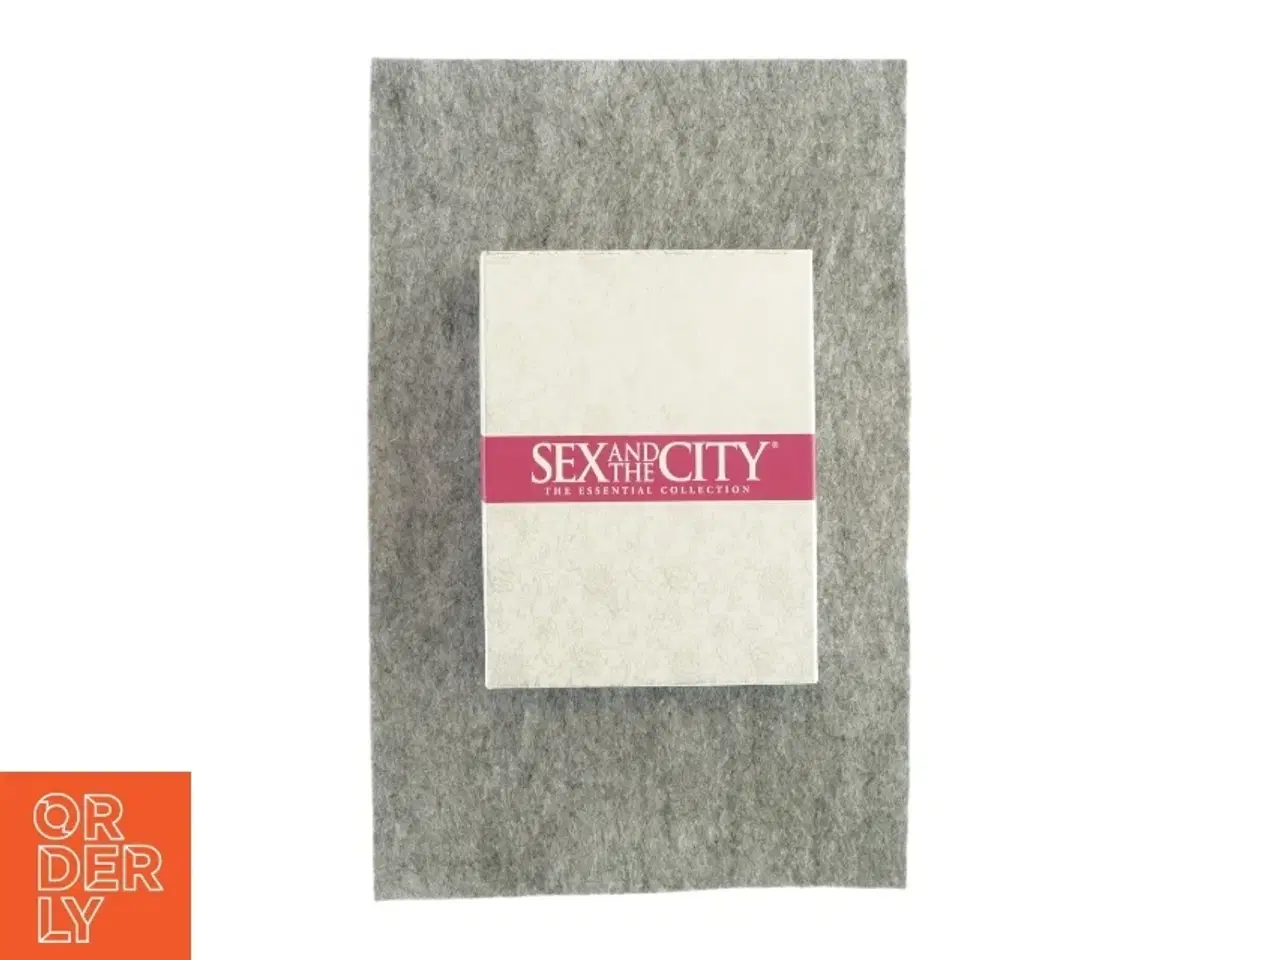 Billede 1 - Sex and the city, the essential collection (dvd)